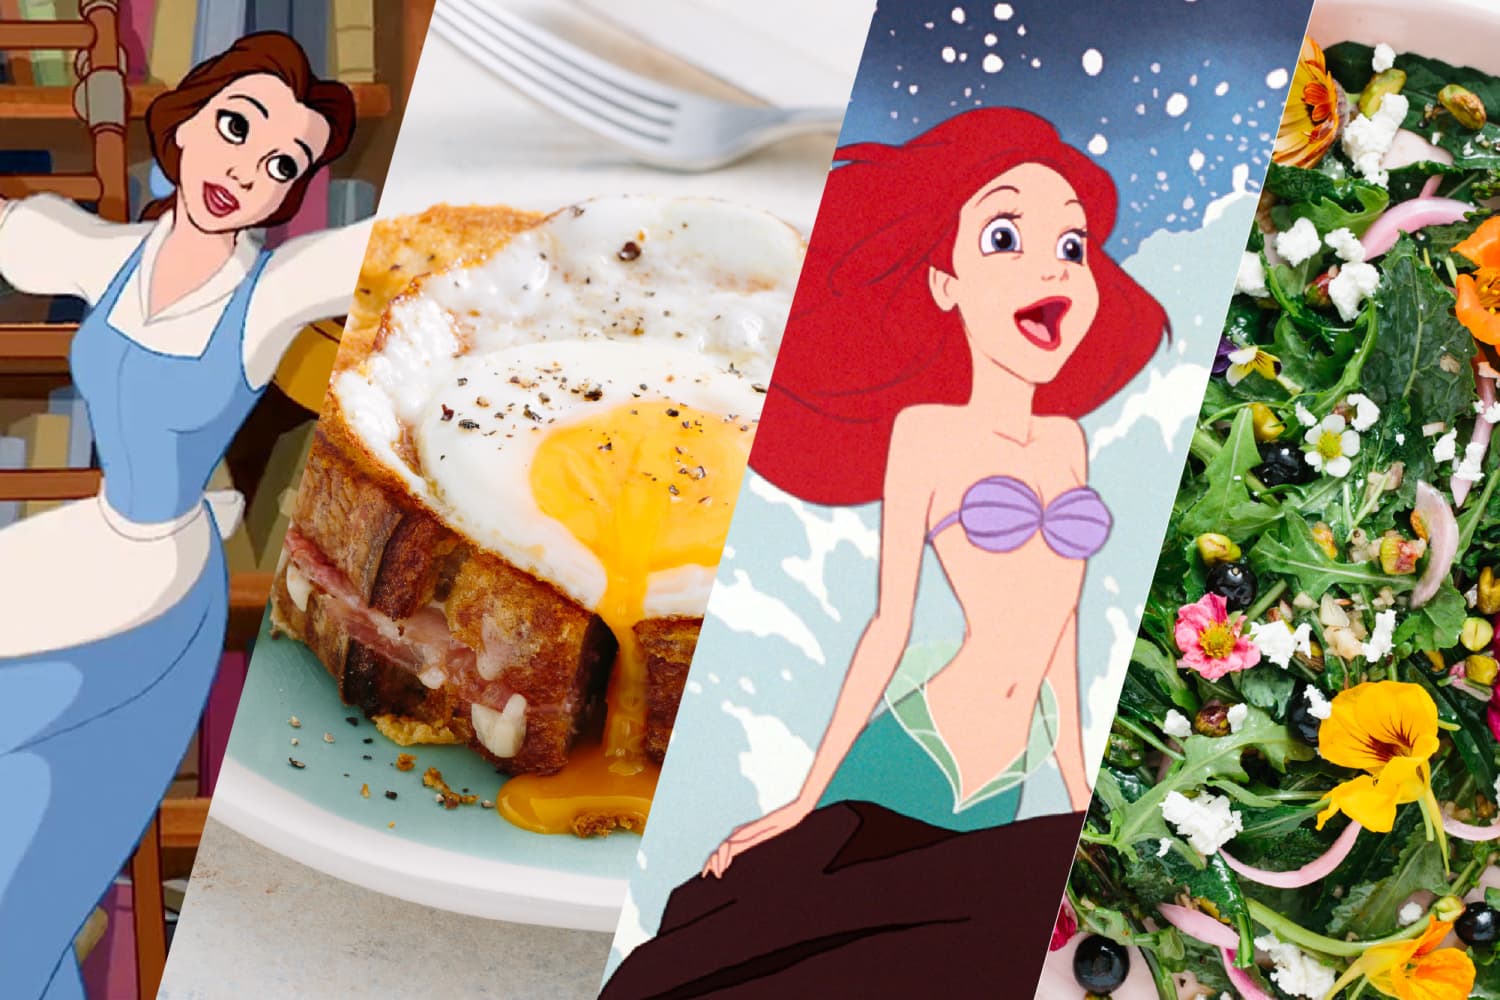 Match Your Favorite Disney Princess to Your Next Dinner | Kitchn